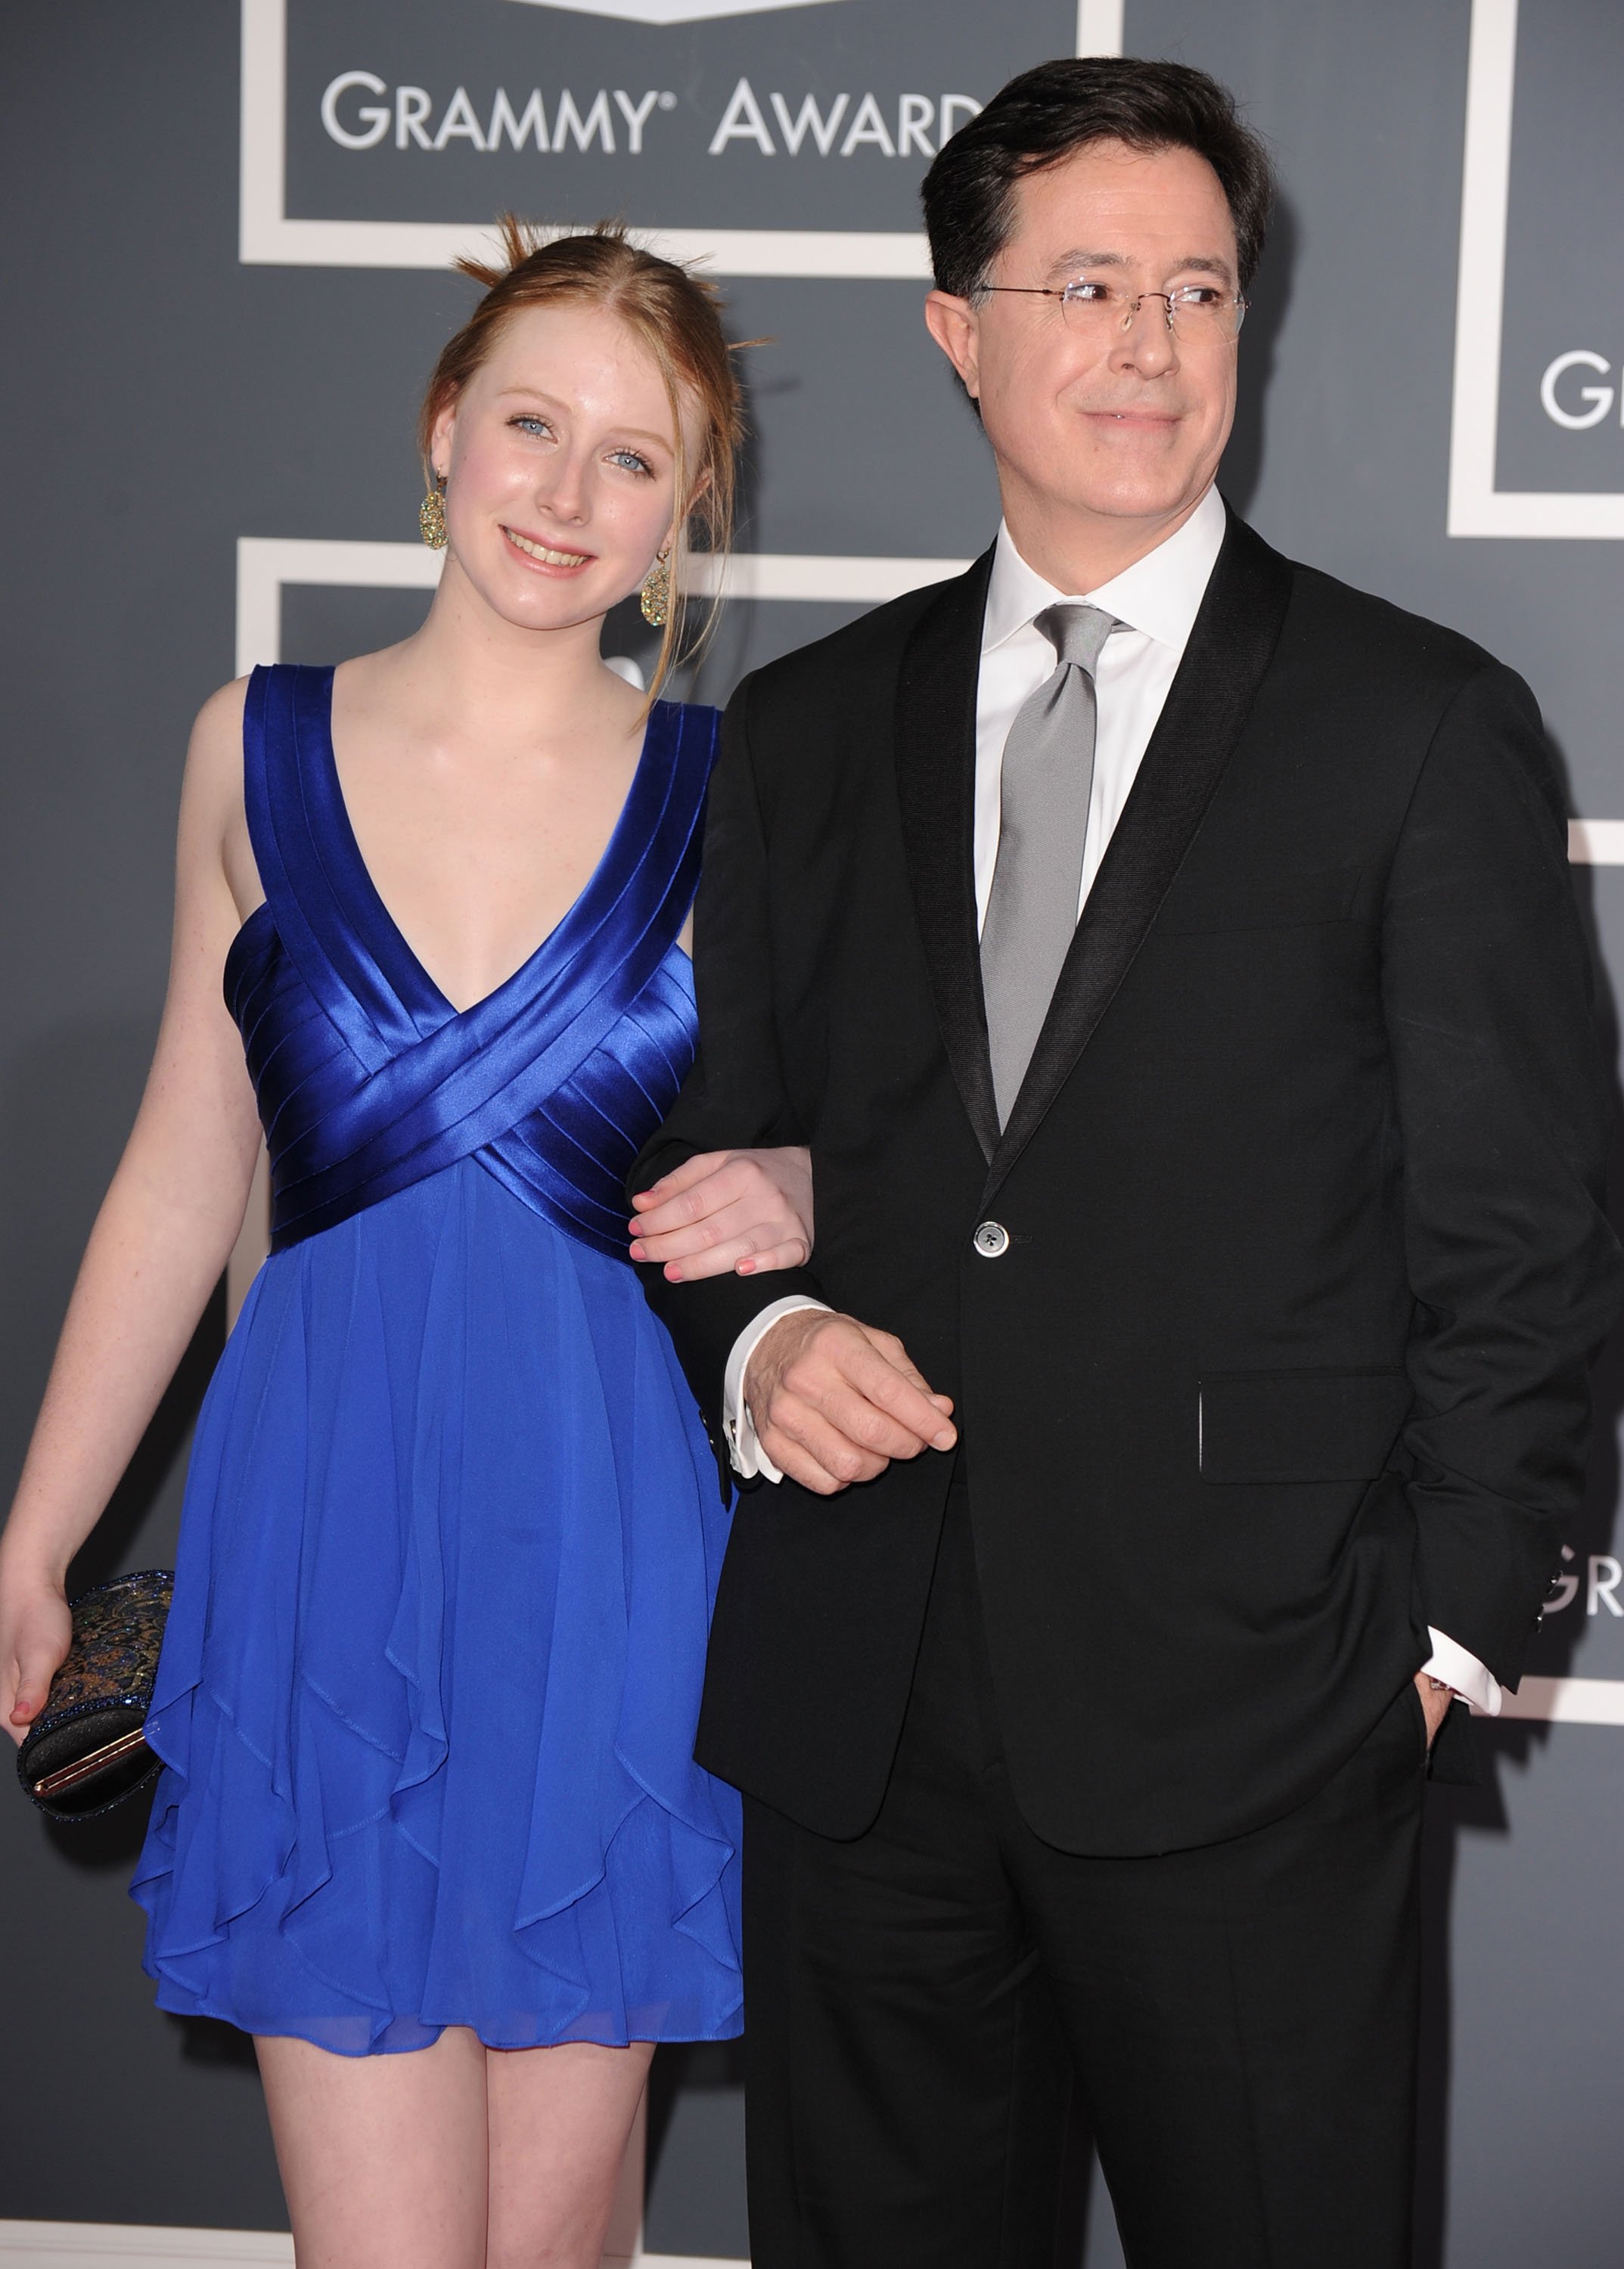 Actor Stephen Colbert (R) and Madeline Colbert arrives at the 52nd Annual GRAMMY Awards held at Staples Center on January 31, 2010, in Los Angeles, California. | Source: Getty Images